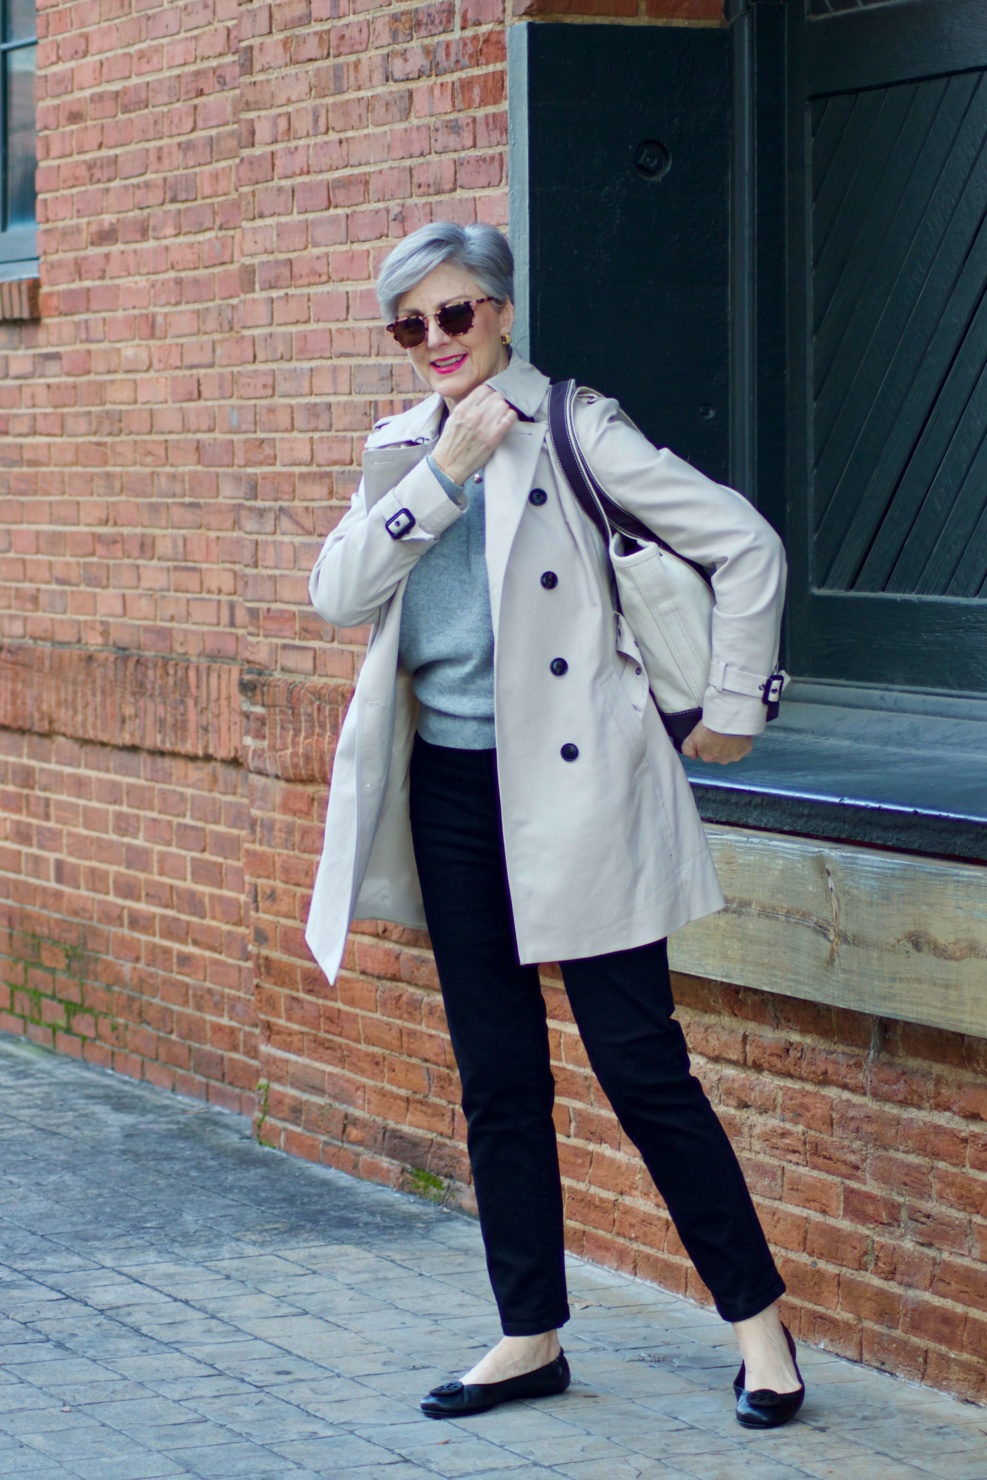 beth from Style at a Certain Age wears an Everlane grey cashmere crewneck, high rise black cigarette jean, Tory Burch black ballet flats and a double-breasted trench coat